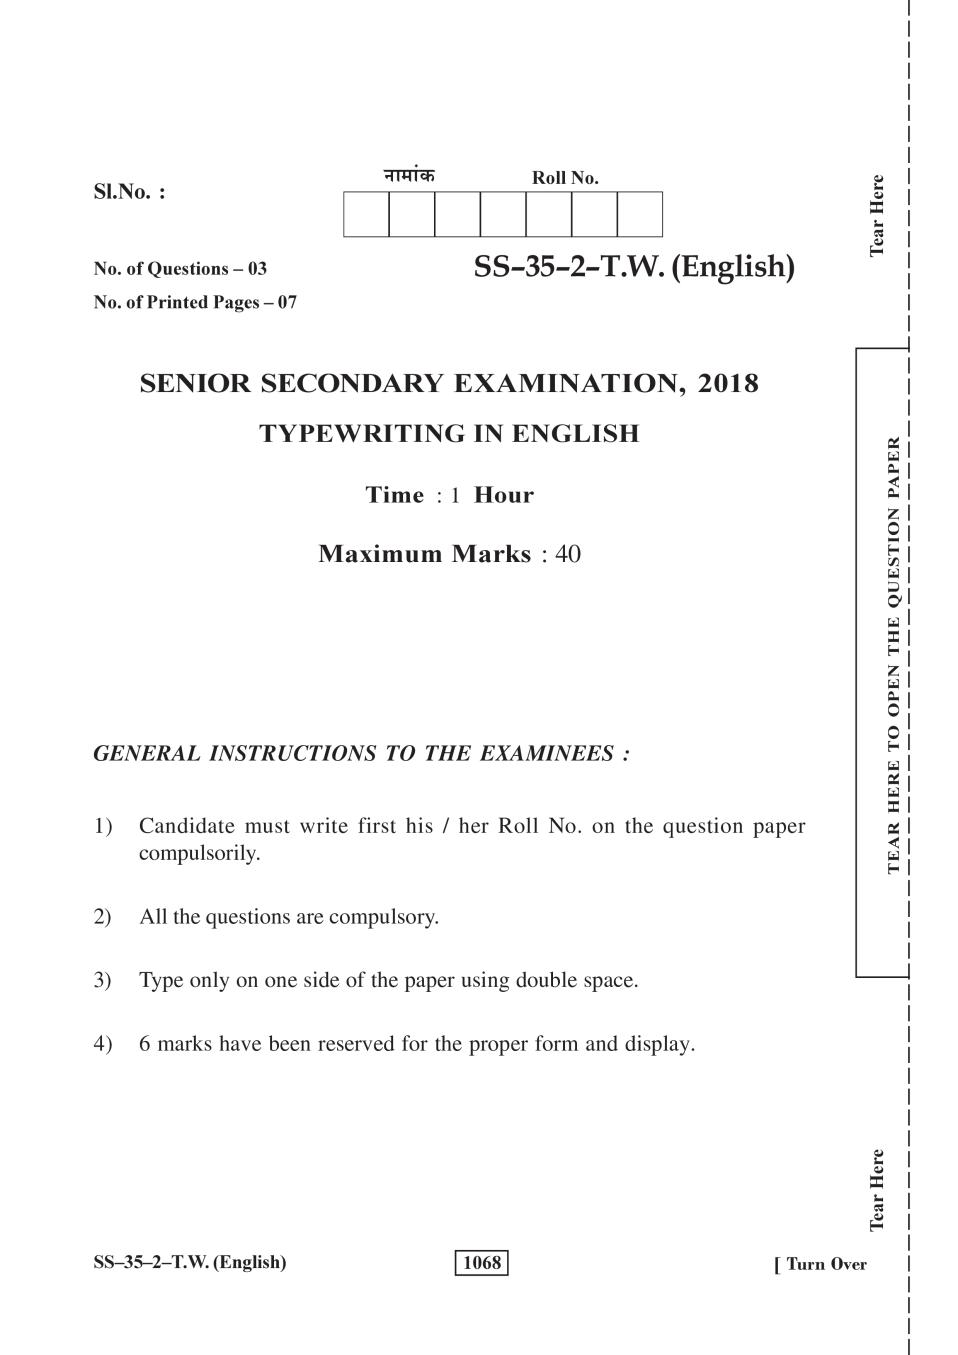 Rajasthan Board 12th Class Typewriting English Question Paper 2018 - Page 1